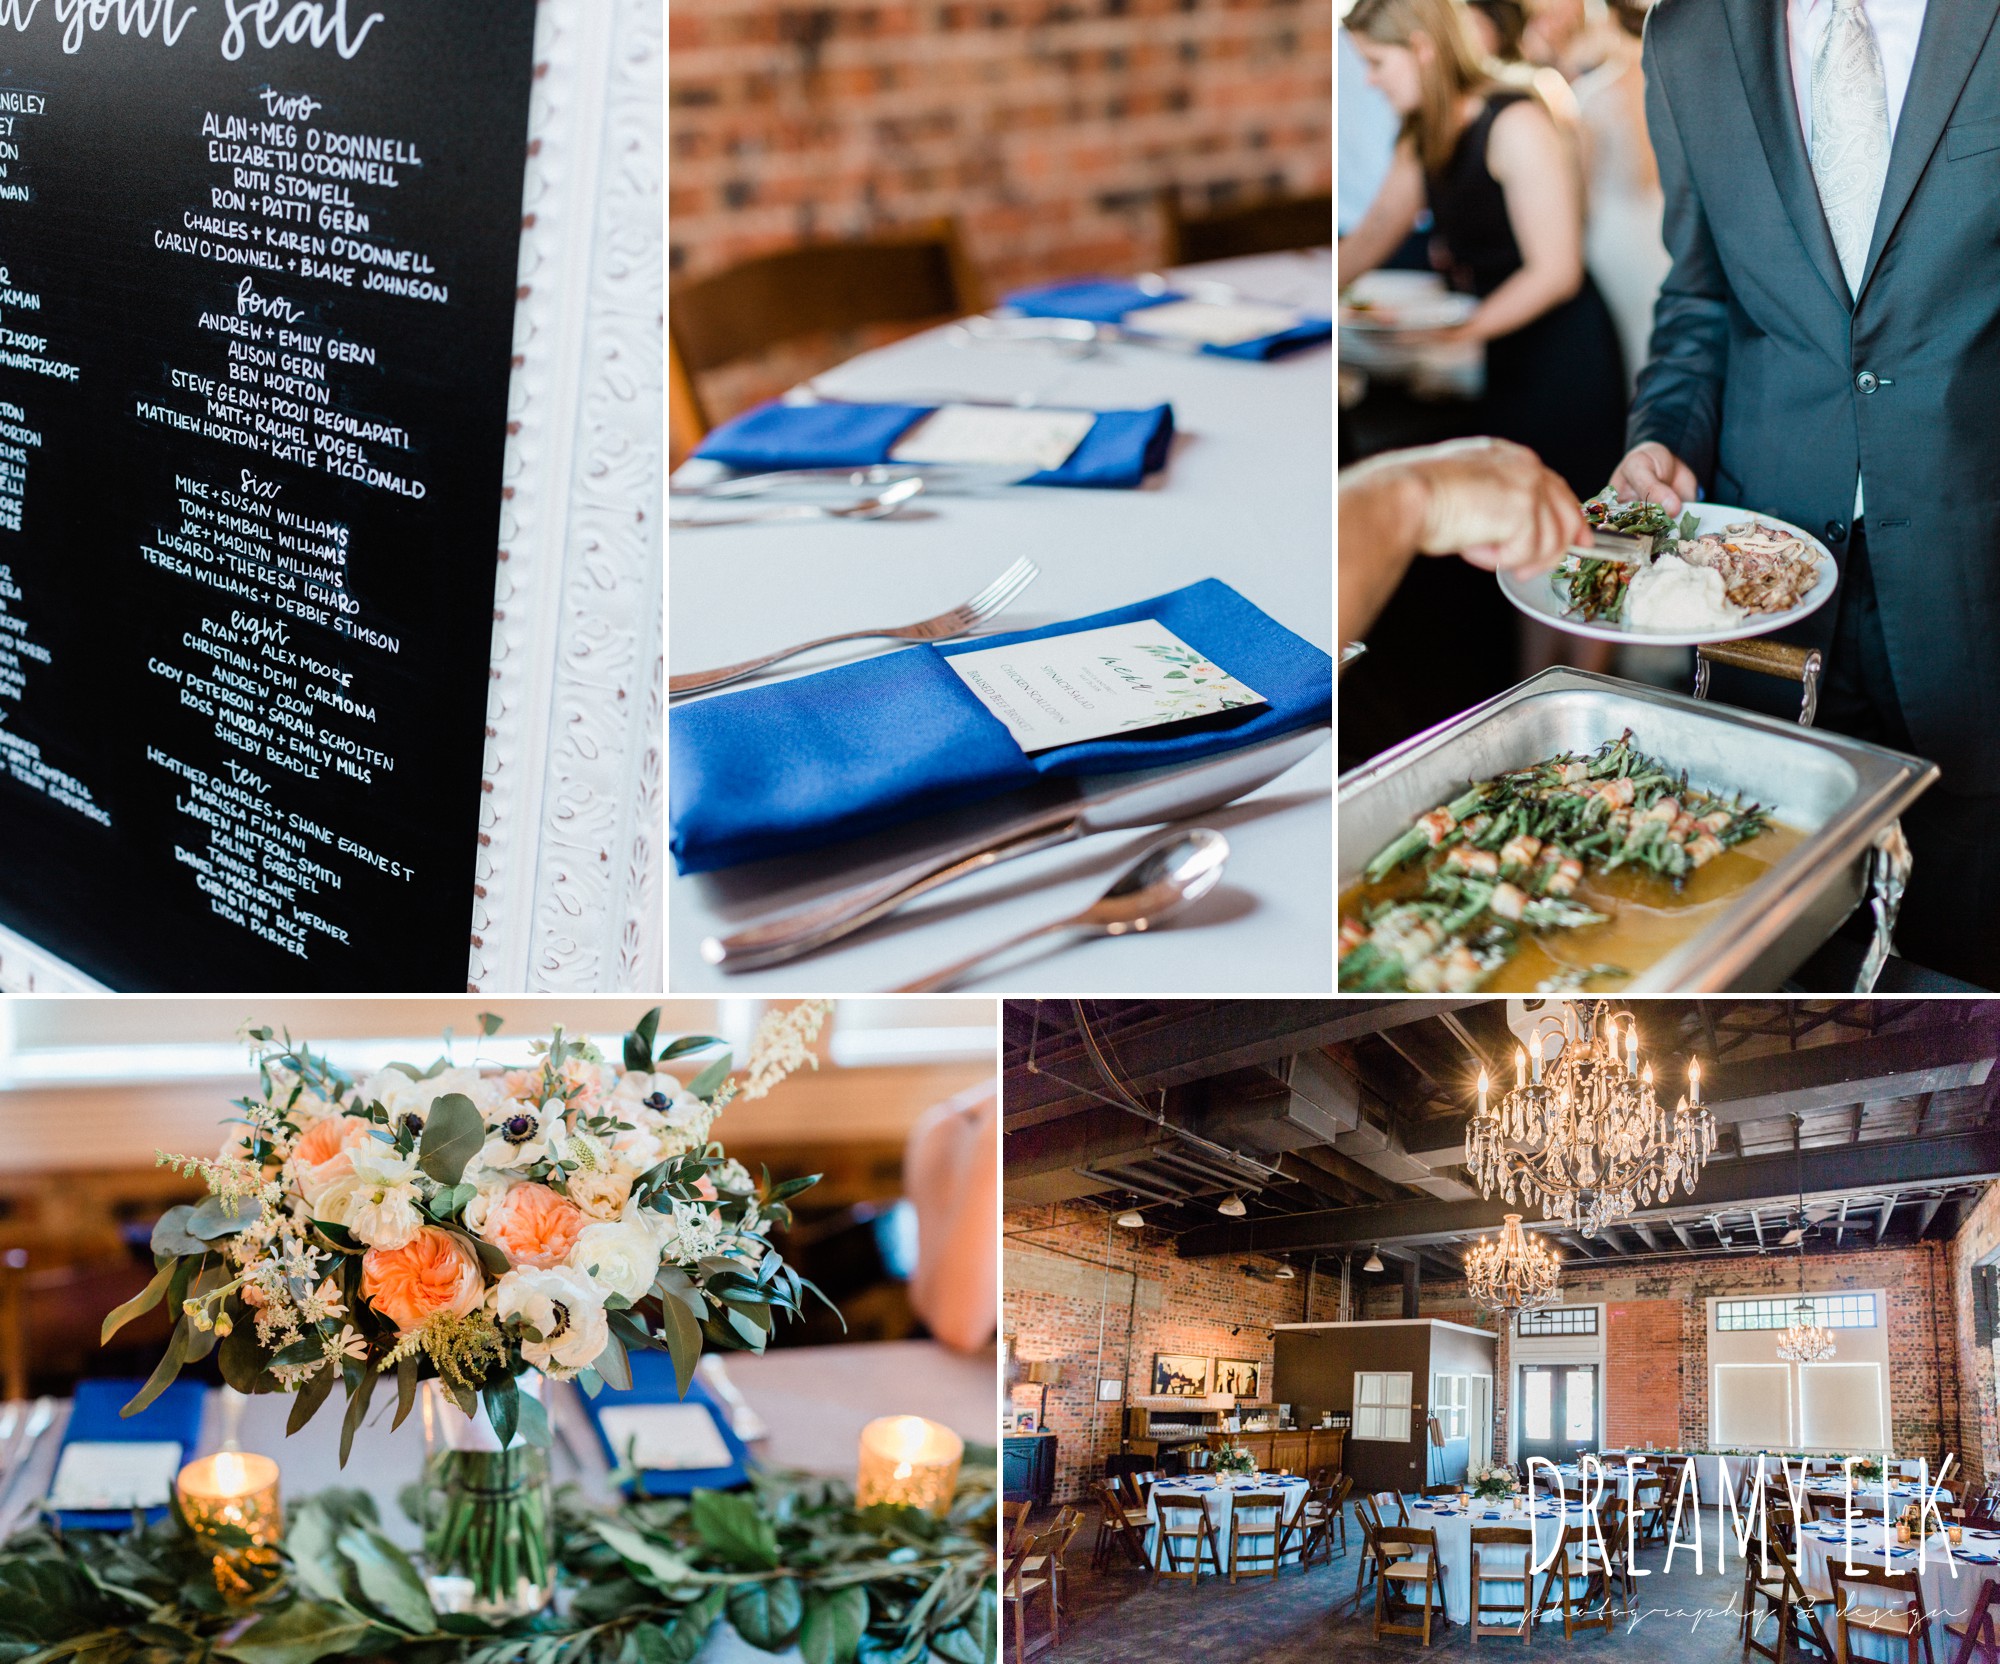 ashley and company, dvine cuisine, chalkboard signage, downtown 202, unforgettable floral, spring wedding photo college station texas, dreamy elk photography and design